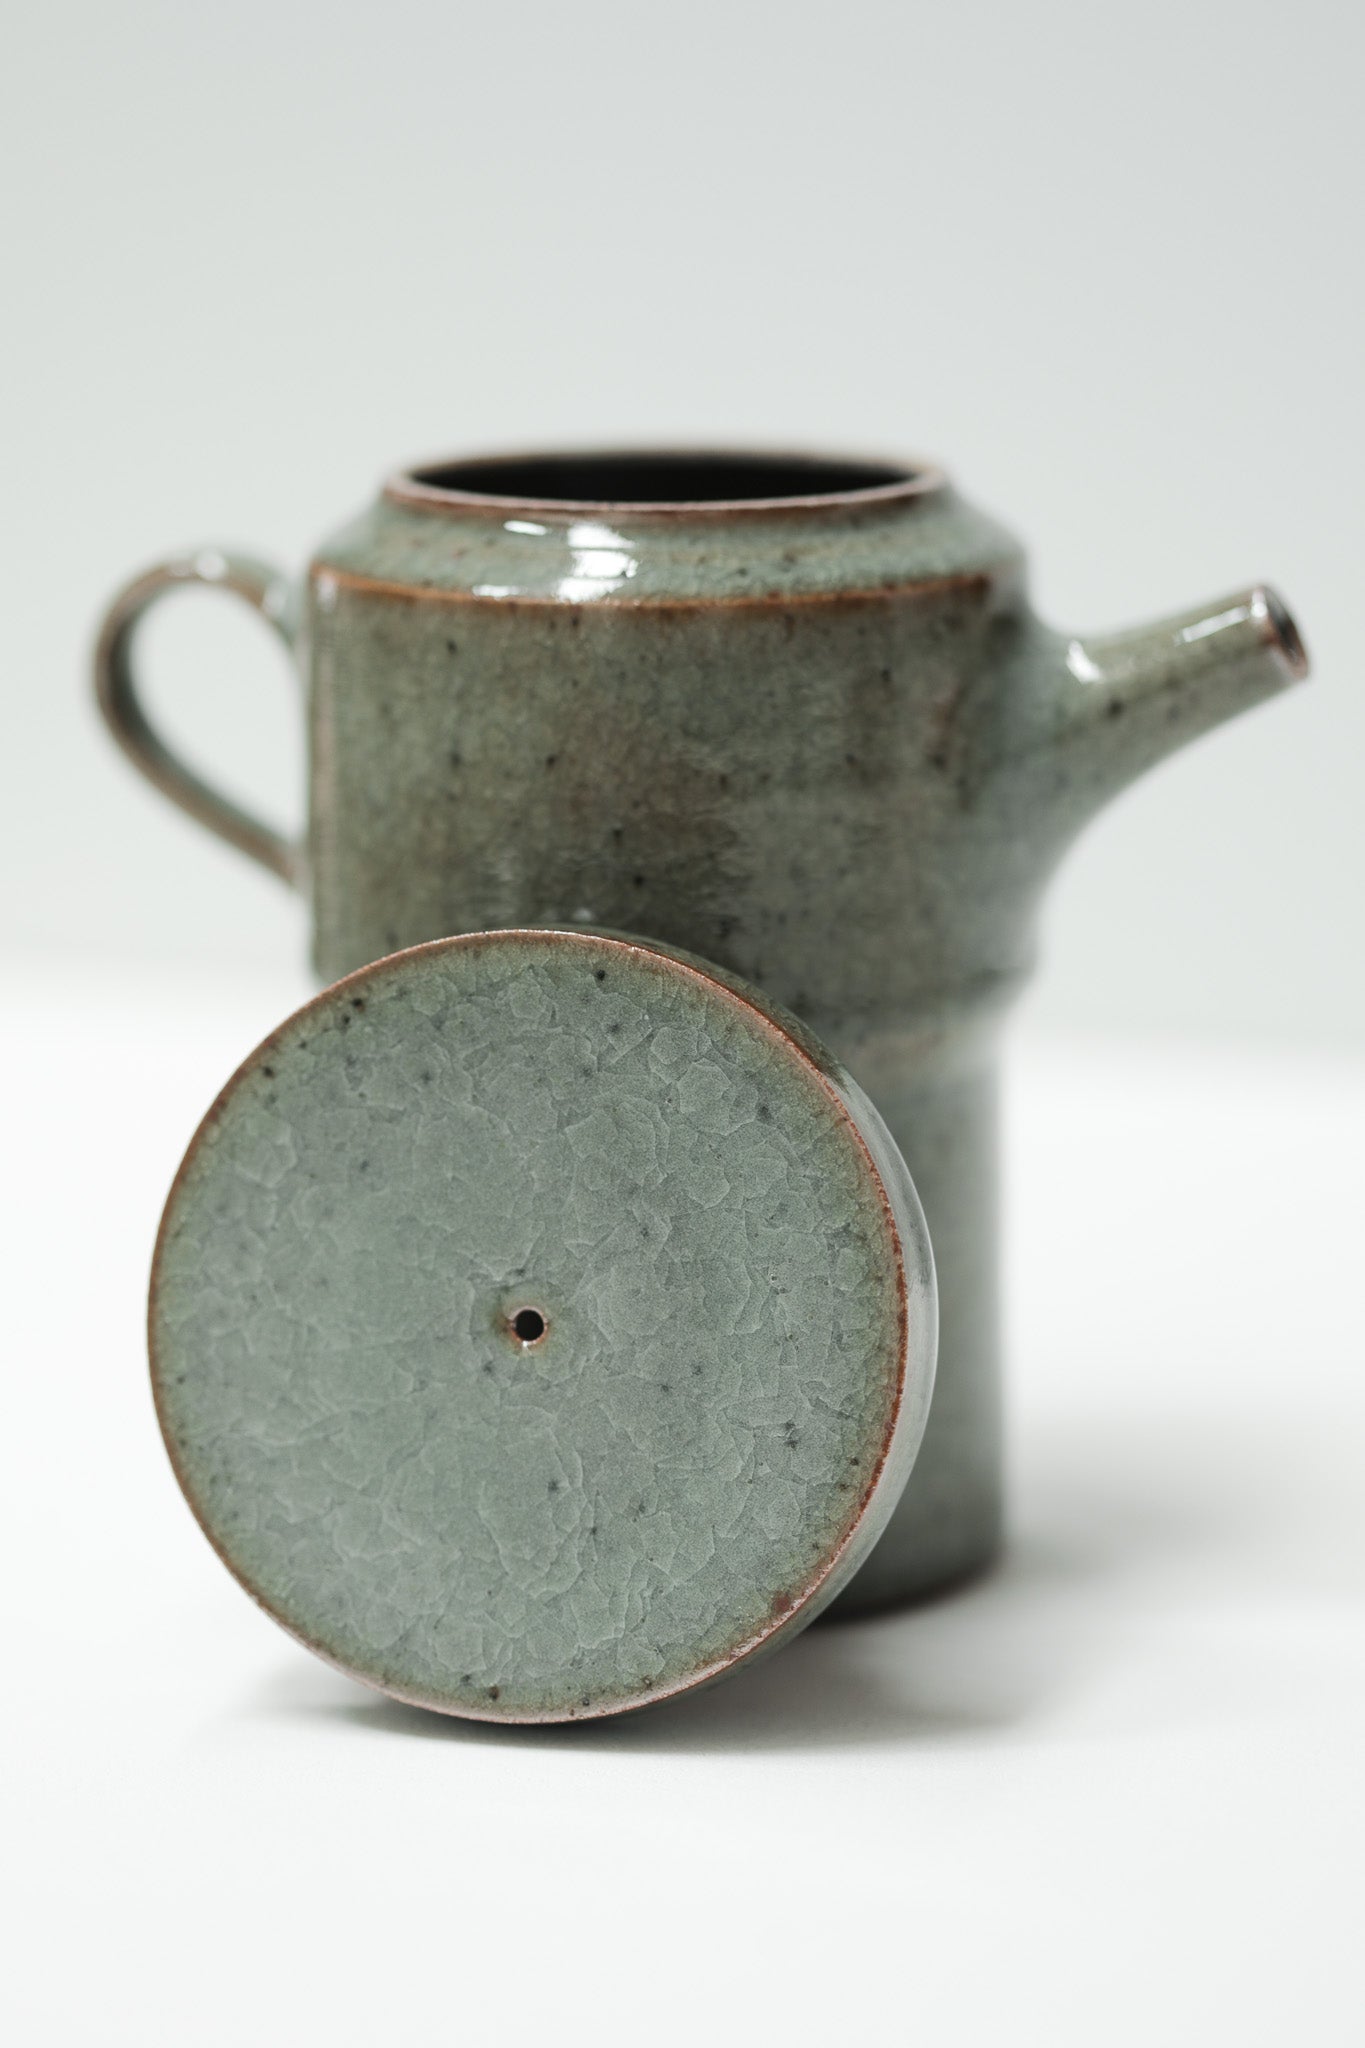 Florian Gadsby: Stepped Teaware for One